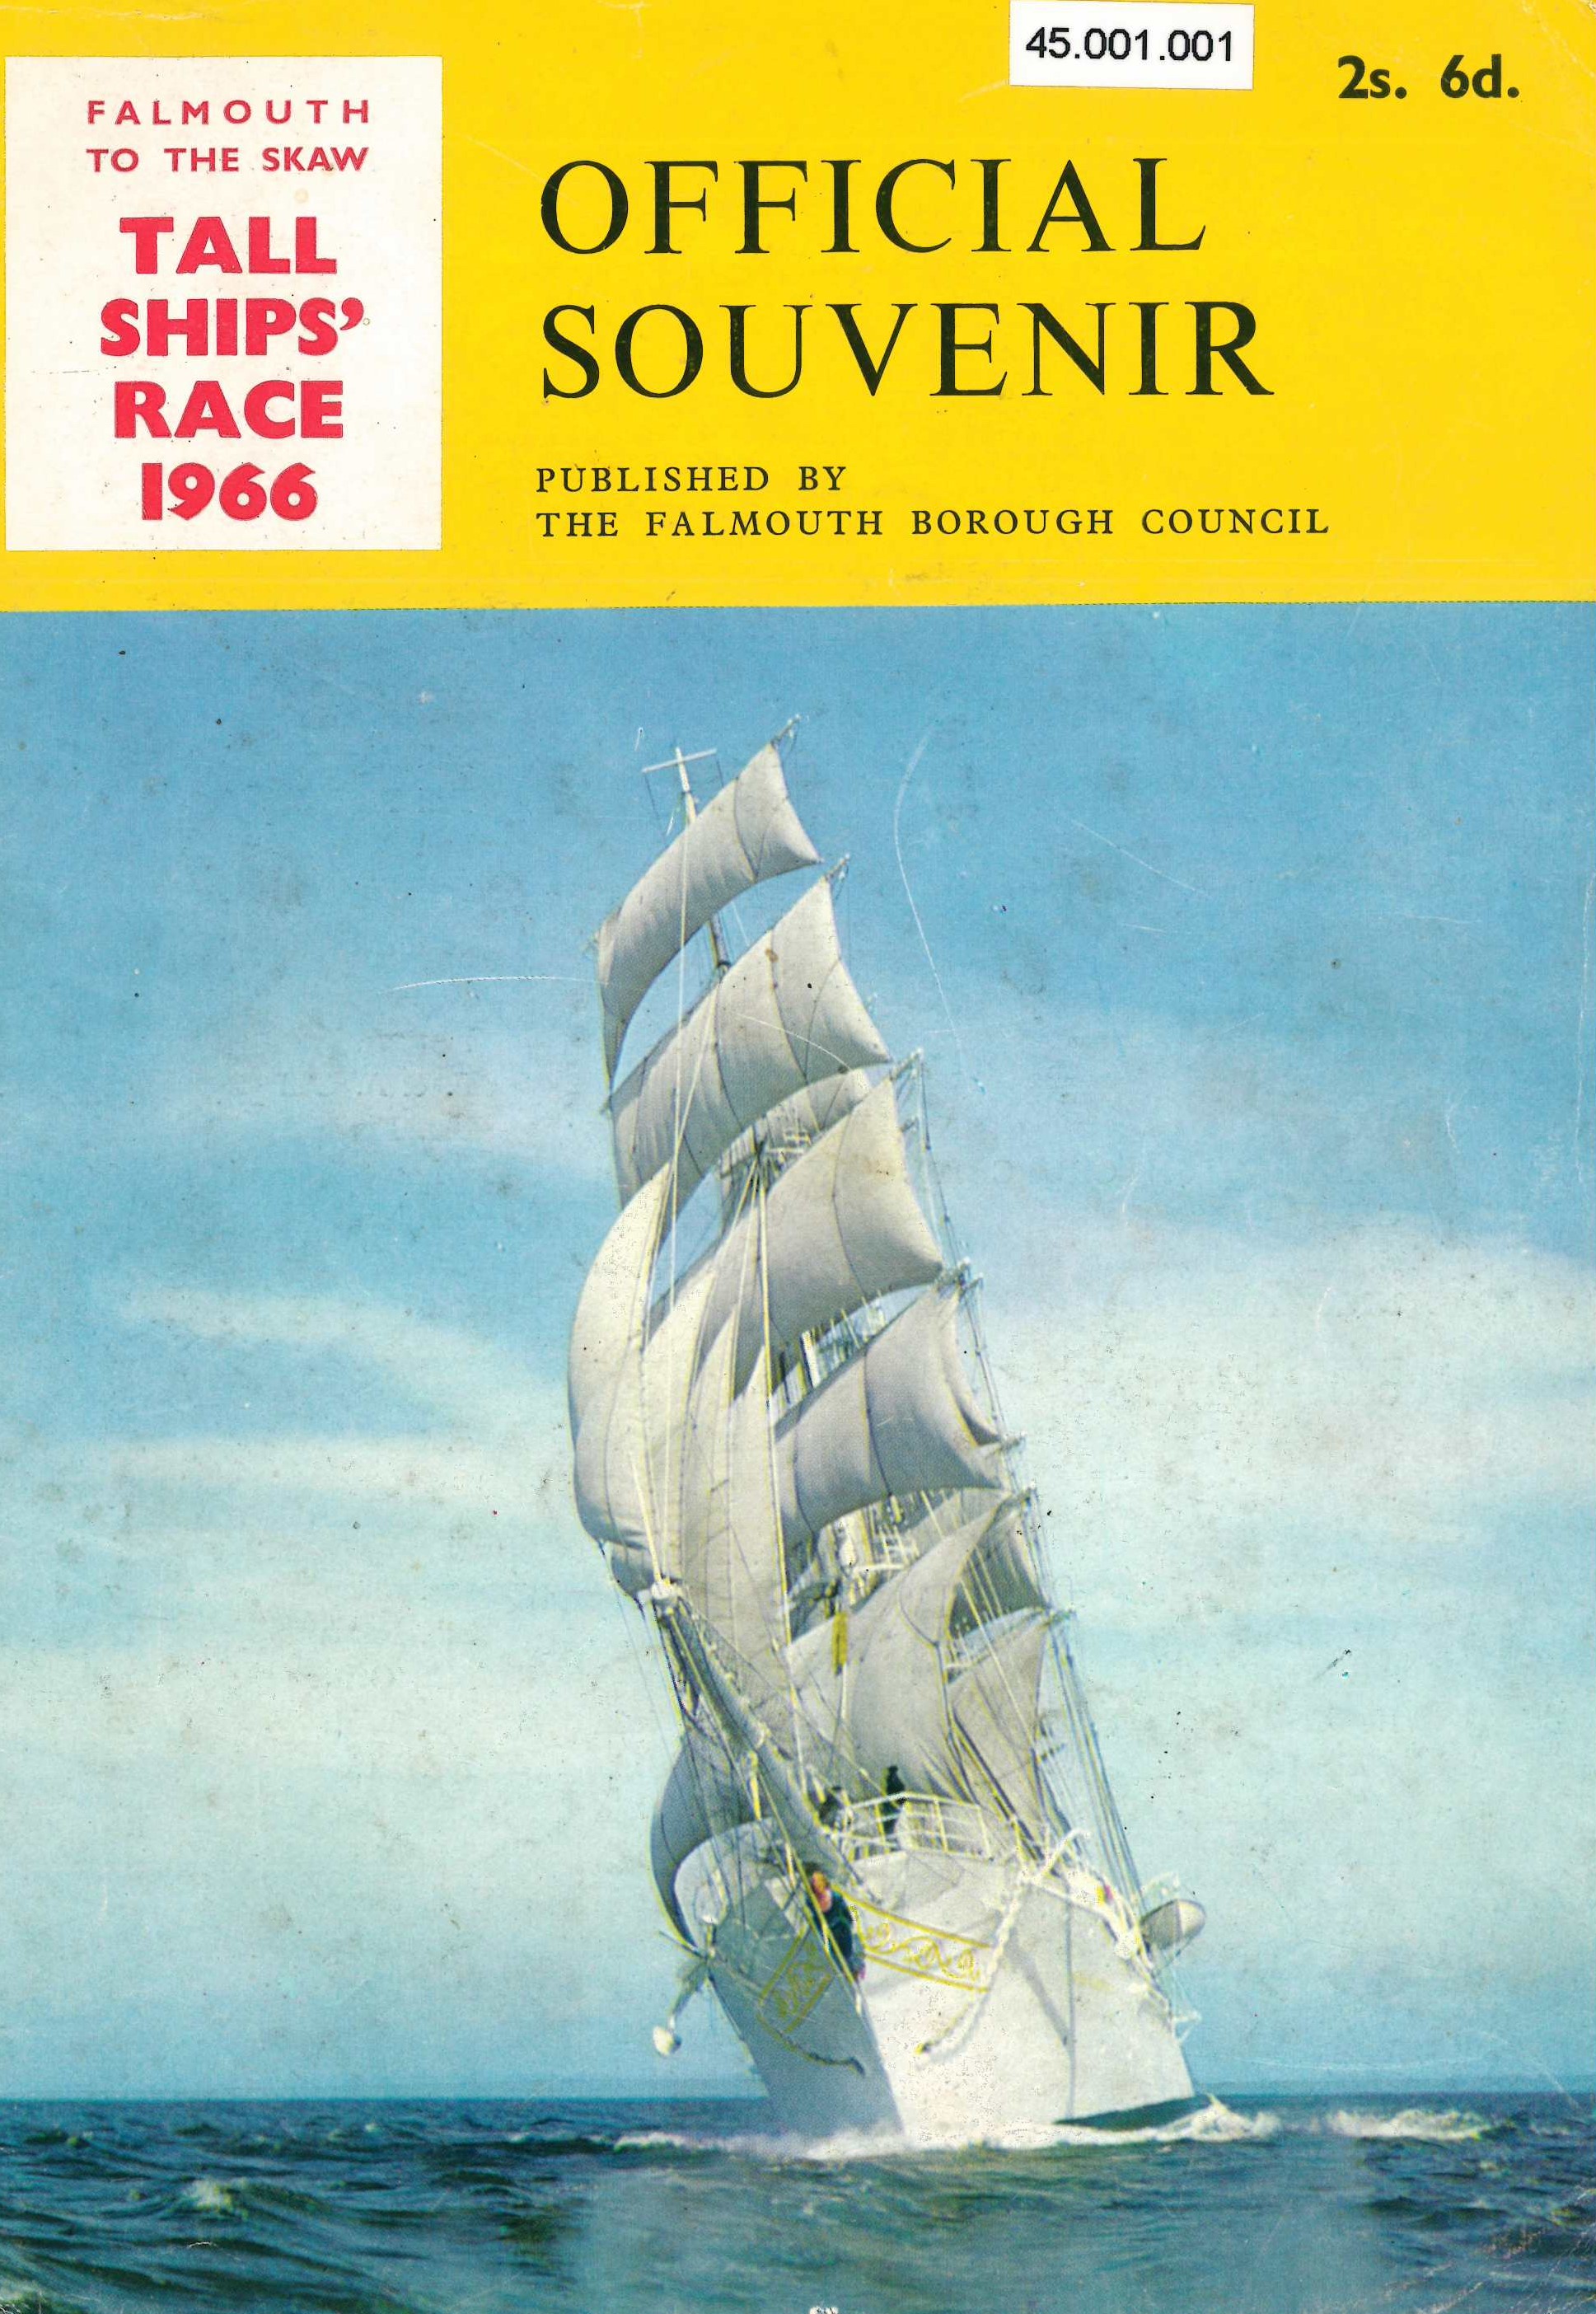 A scan of the official souvenir programme for the 1966 Tall Ships Race from Falmouth. The scan is of the front cover, which depicts a white tall ship on the ocean.